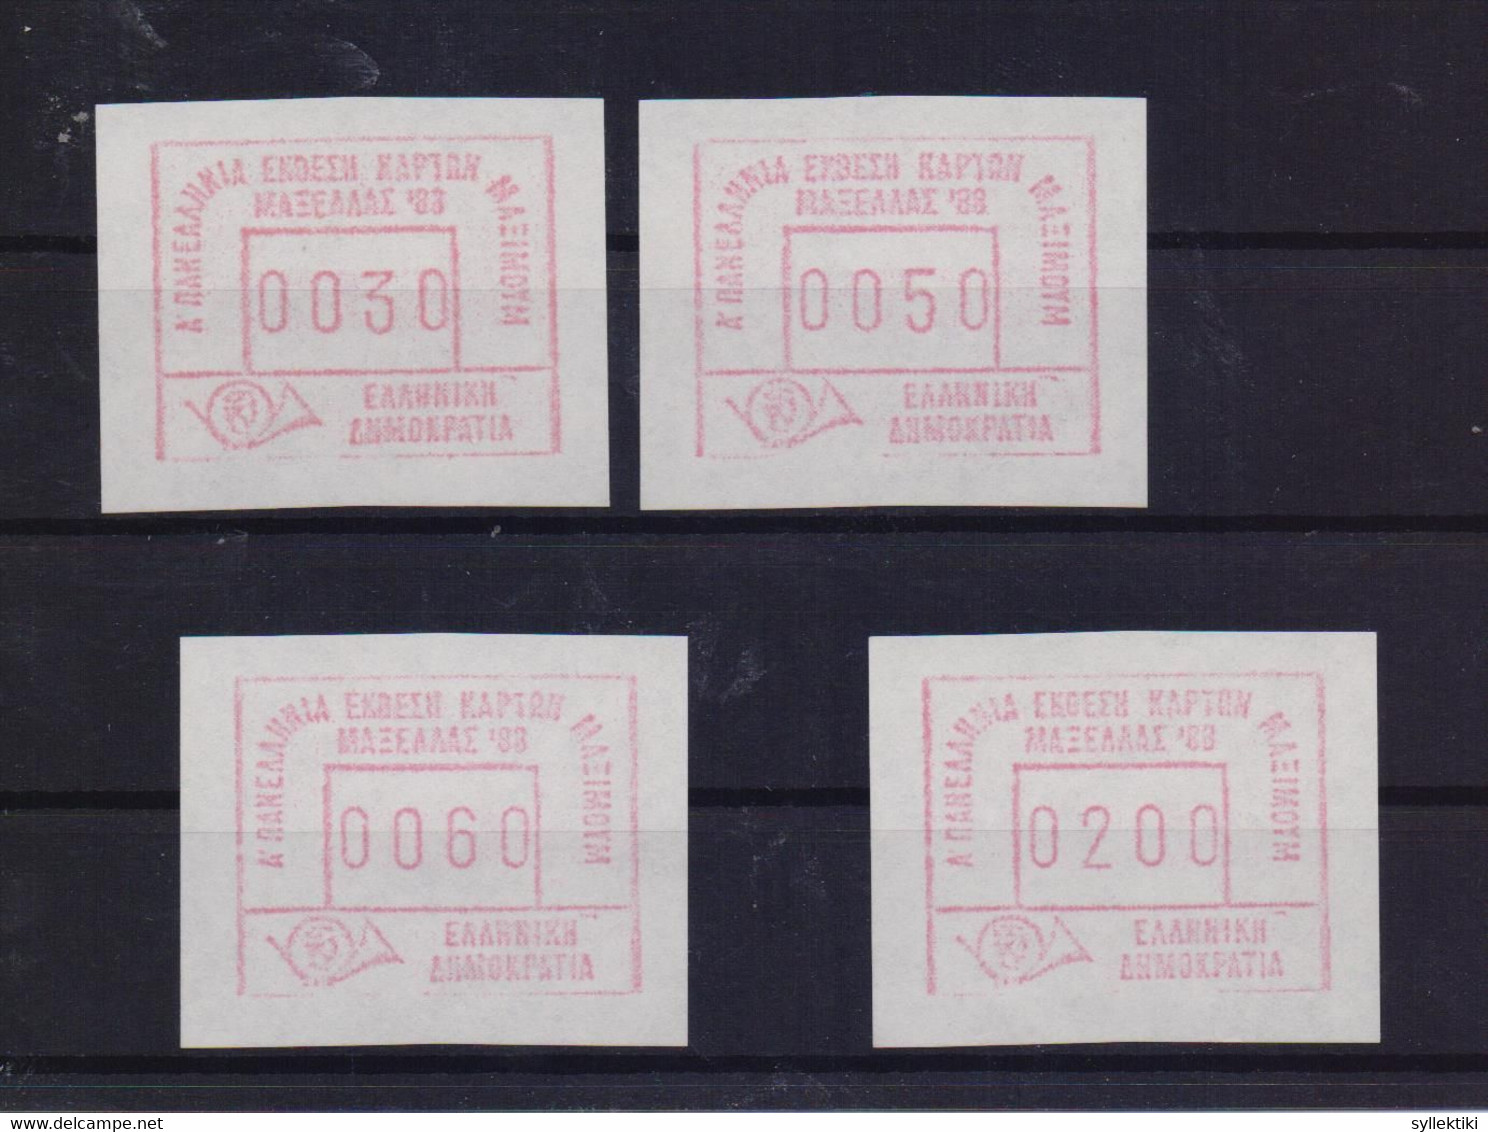 GREECE 1988 ATM FRAMA ΕΧΗΙΒΙΤΙΟΝ MAXELLAS'88 TYPE I COMPLETE SET OF 4 MNH STAMPS - Machine Labels [ATM]